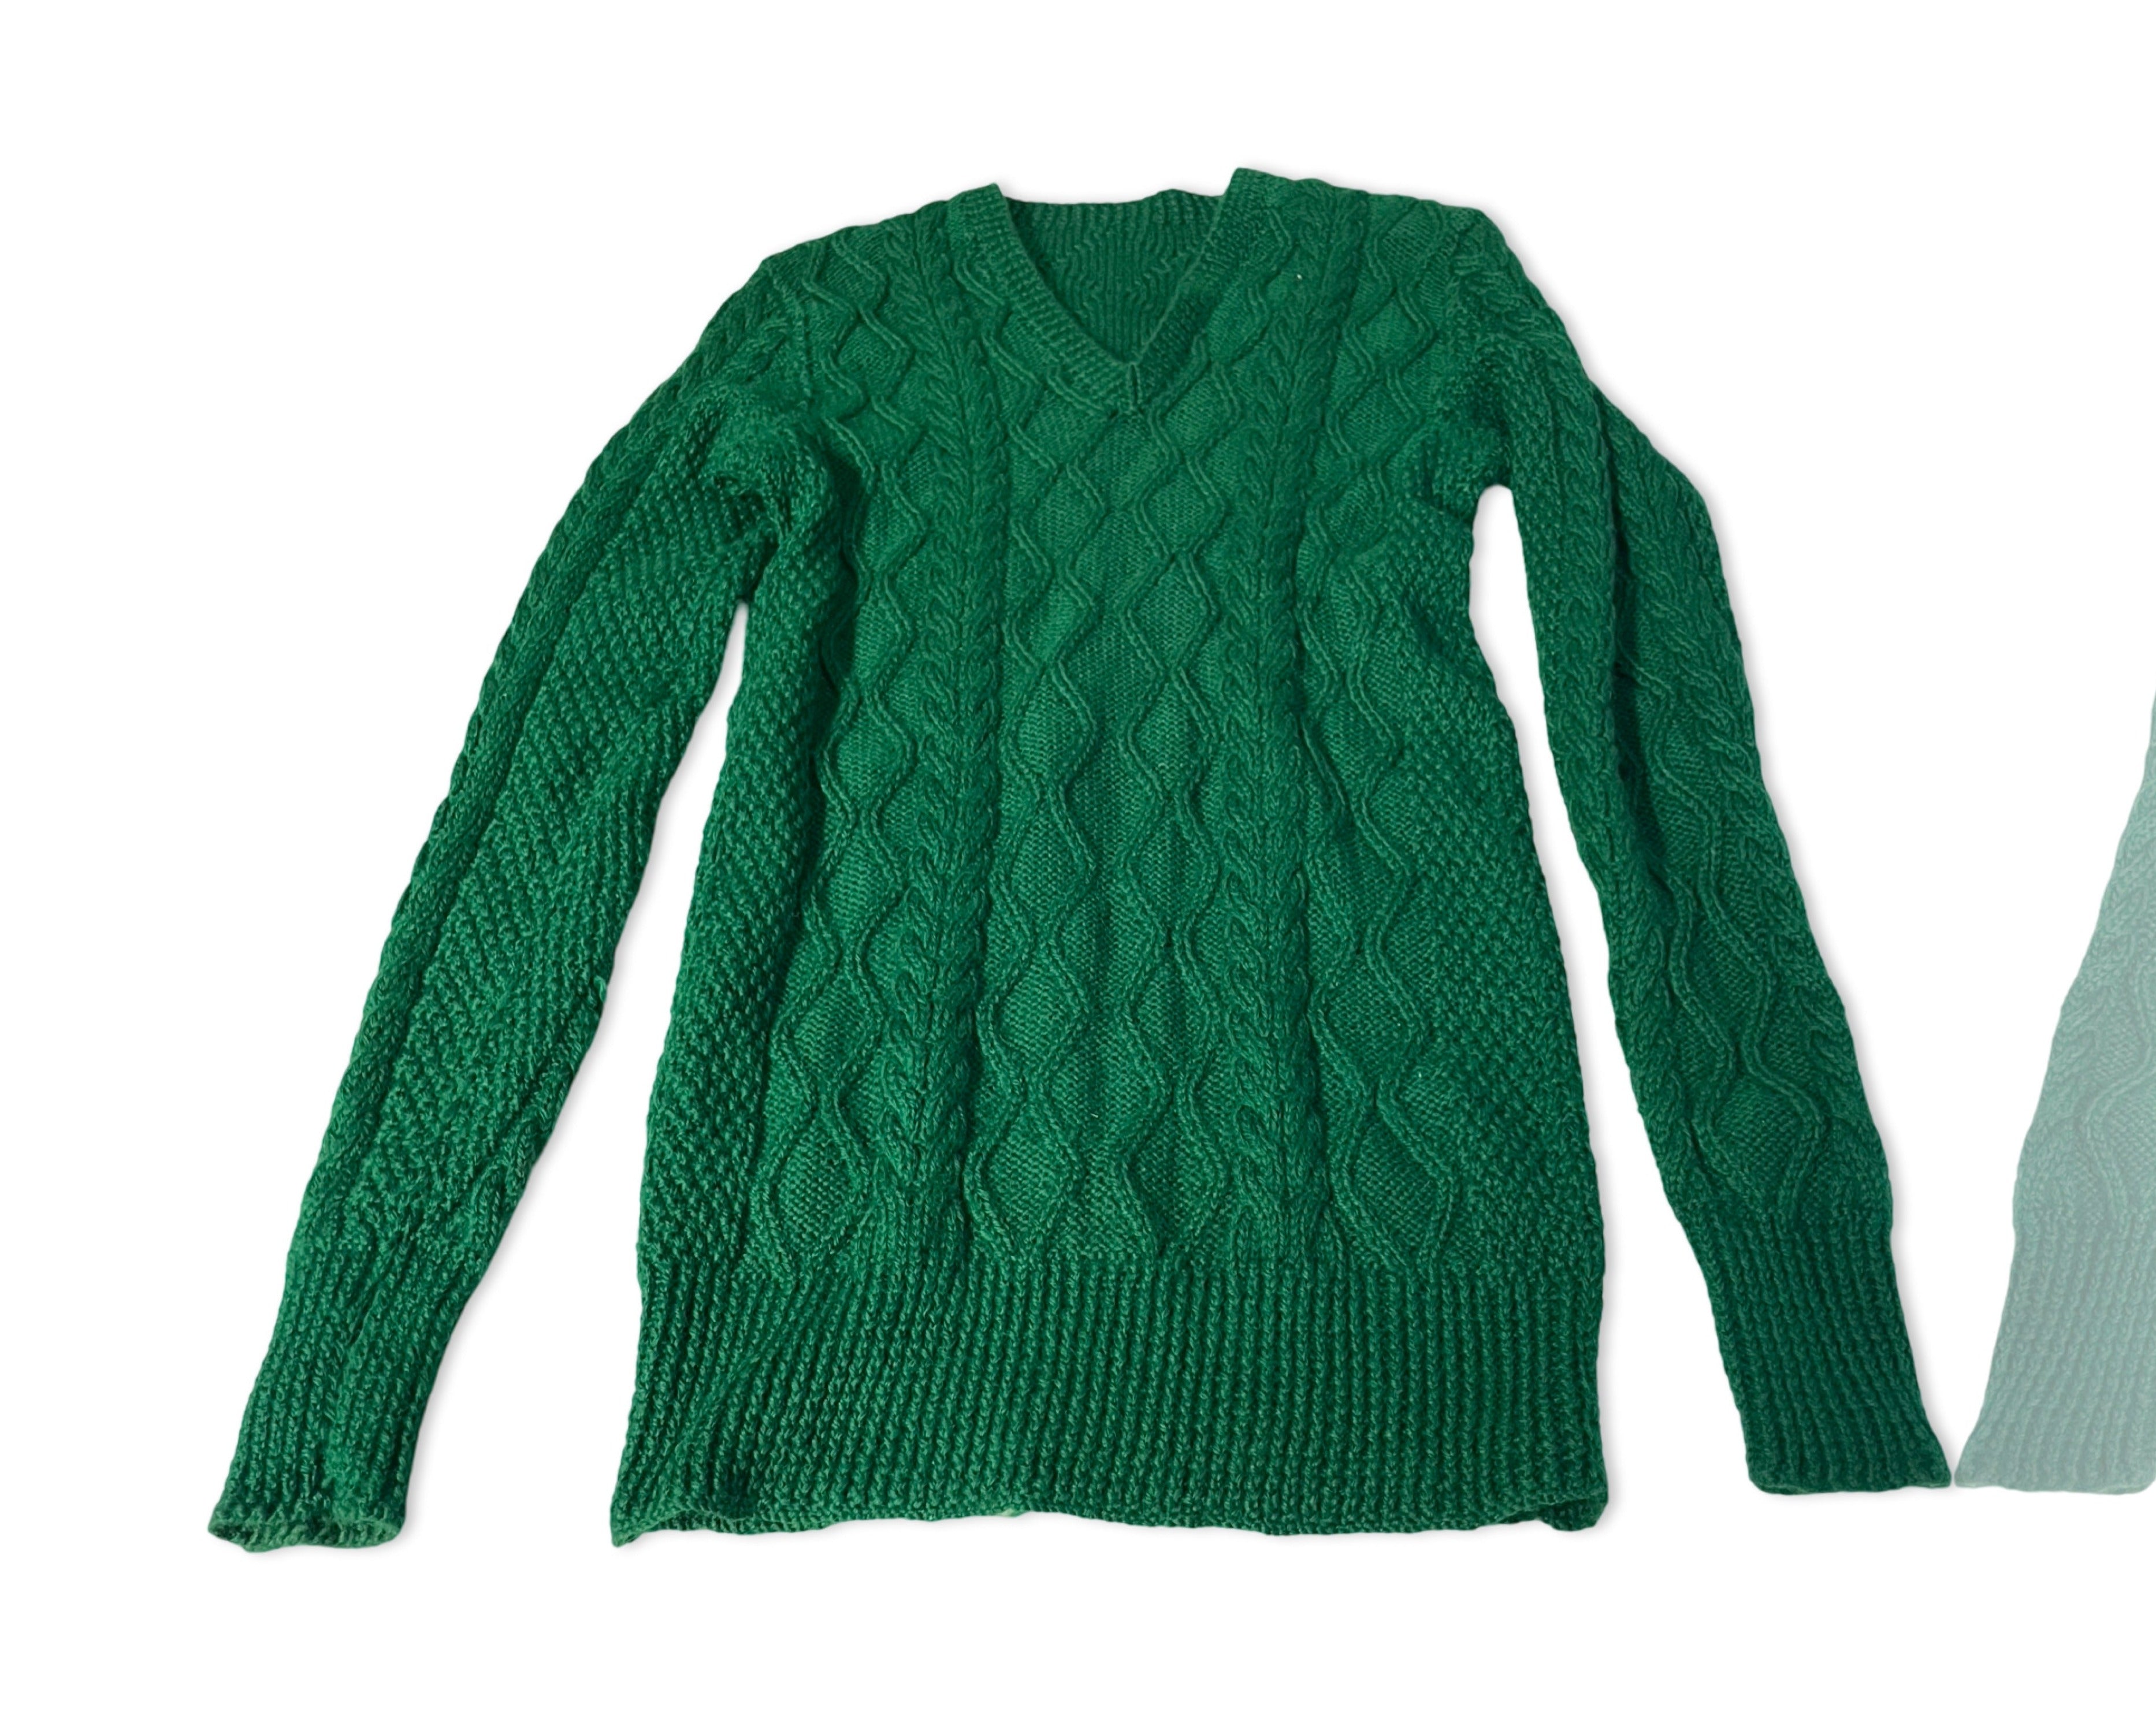 Super Soft  womens Crew Sweater in Green size small to medium |SKU 4231